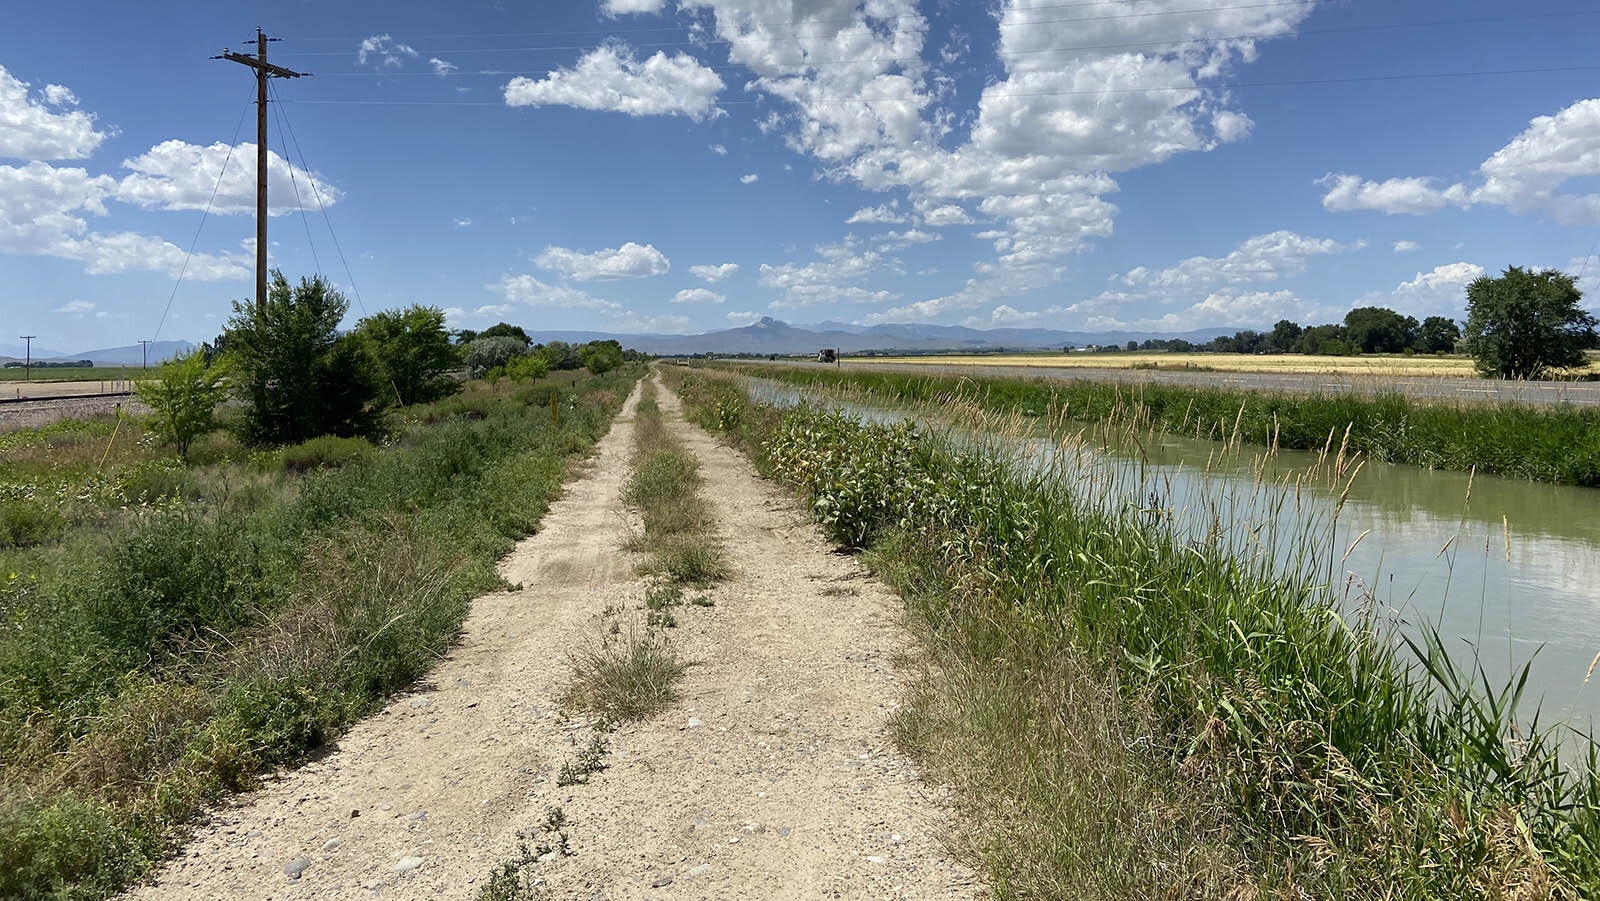 A proposed 25-mile trail route from Powell to Cody, Wyoming, follows an active railroad on one side and a canal on the other.